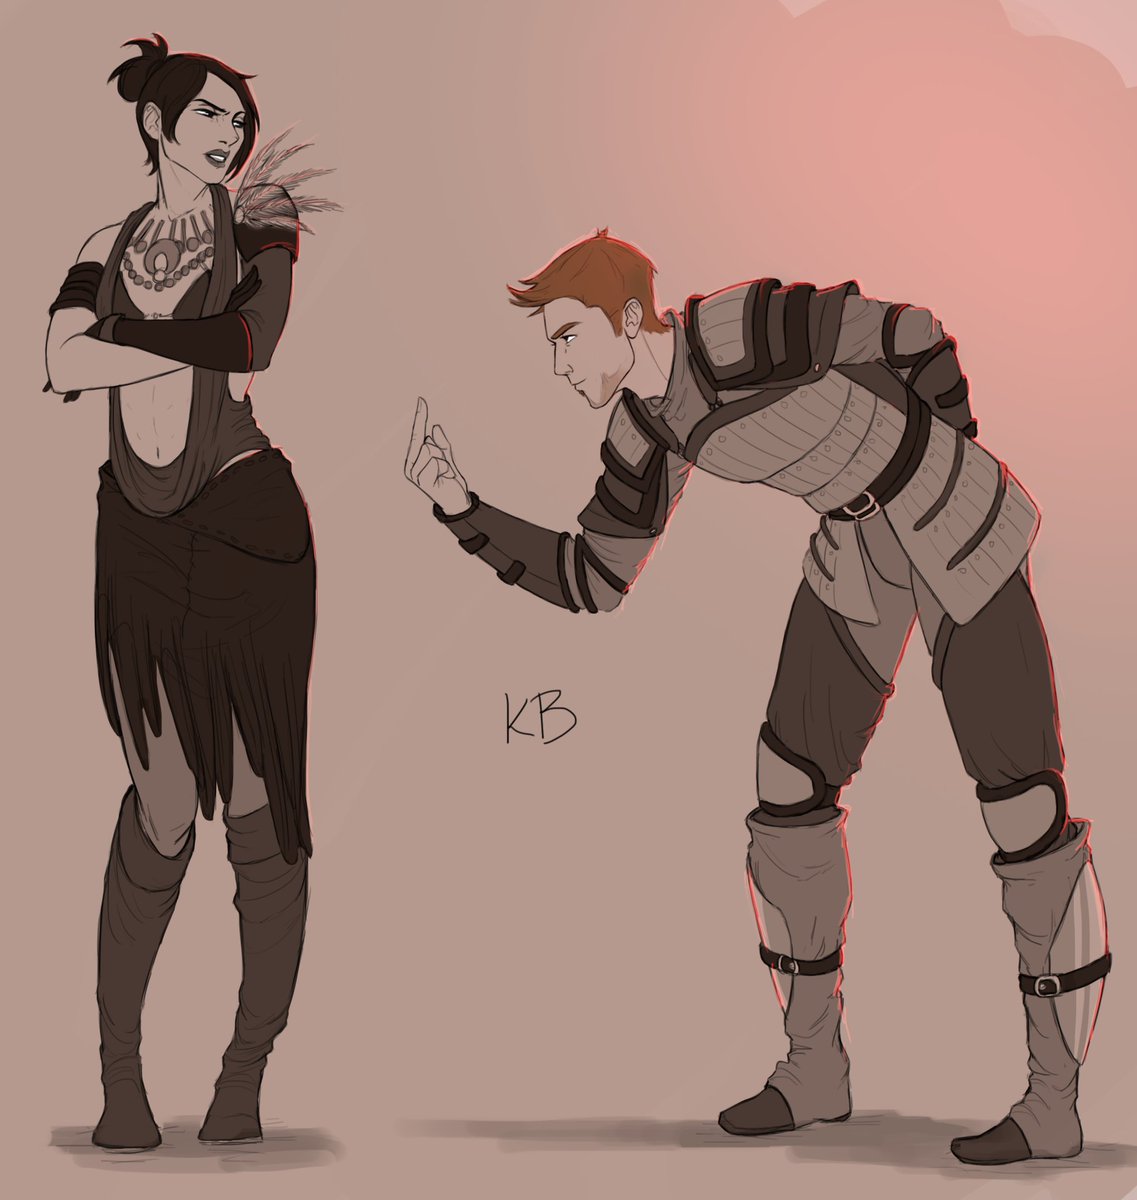 Day 9 of #senshistocktober
'Can you two just... Try and get along?'
Working on this one REALLY made me want to play Origins again 😂
#DragonAge #dragonageorigins #bioware #alistairtheirin #greywardens #fanart